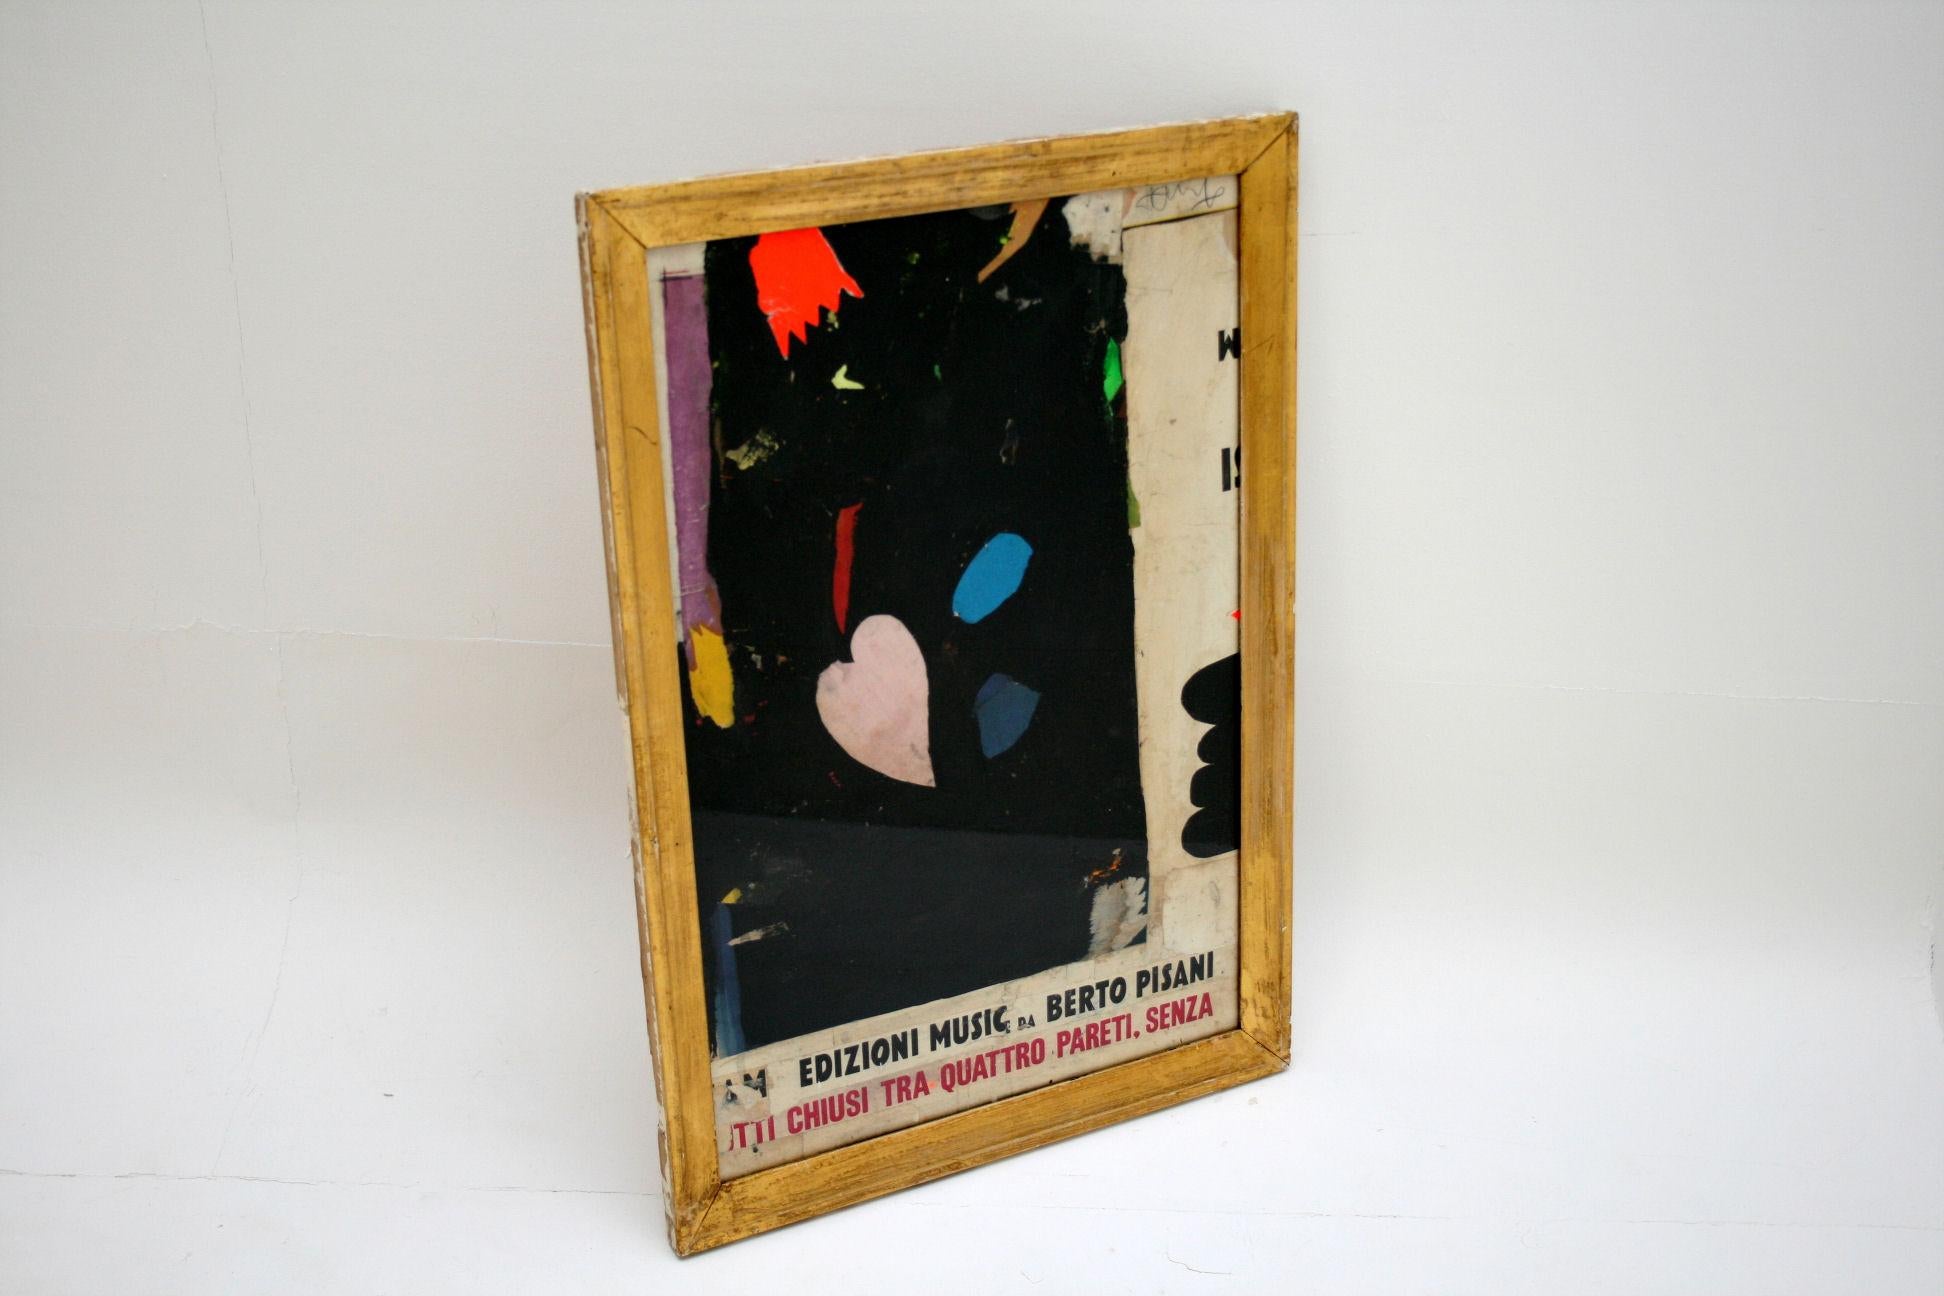 EDIZIONI MUSIC da BERTO PISANI
By Huw Griffith
Collage: 19th century French ephemera, film
posters from ‘30s, ‘40s & ‘50s, graphite crayons
and household paint.
The collage has been placed into an antique frame which has been reworked by Huw